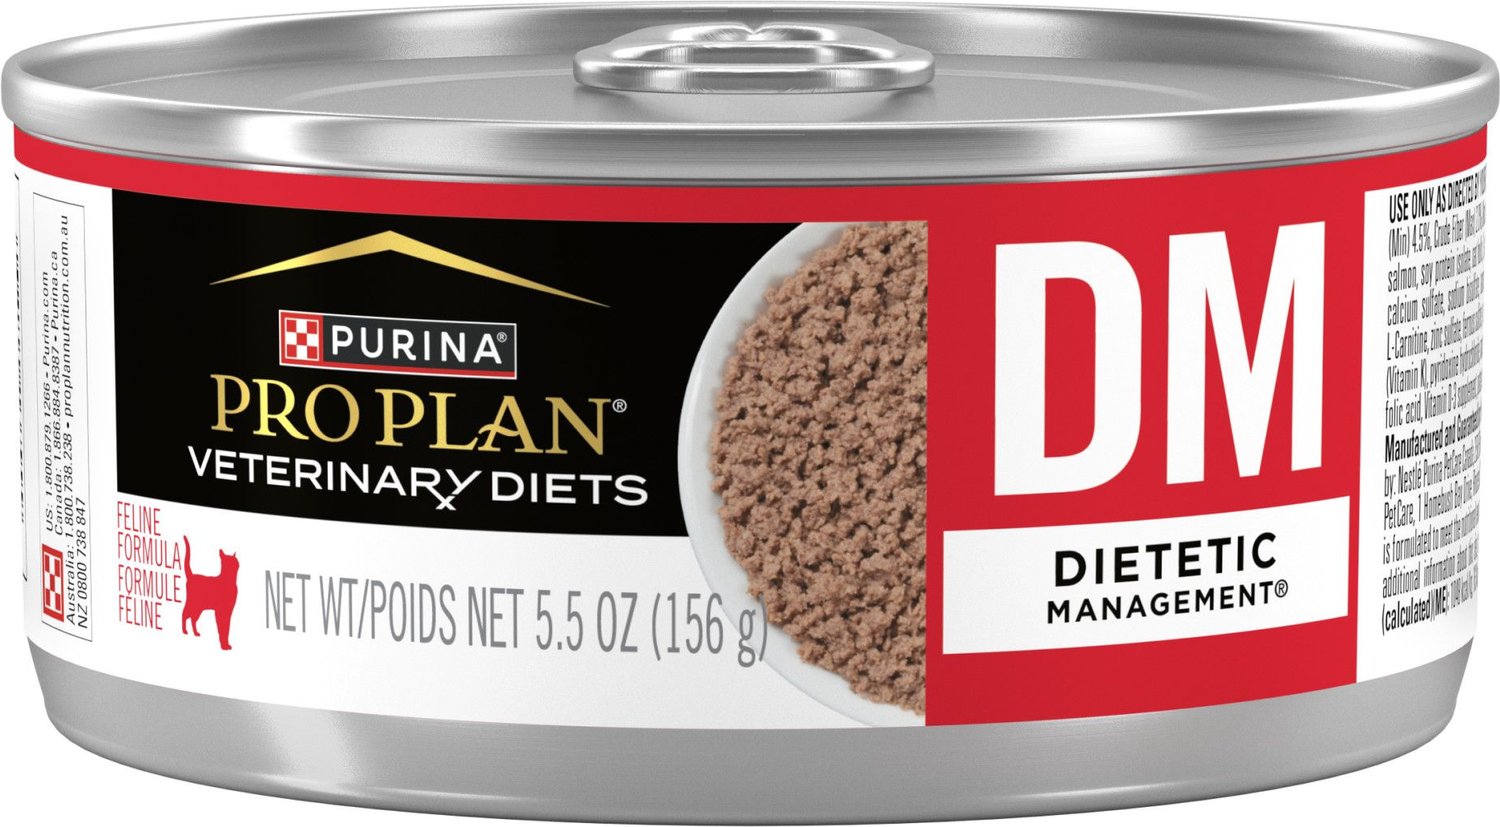 PURINA PRO PLAN VETERINARY DIETS DM Dietetic Management Formula Canned